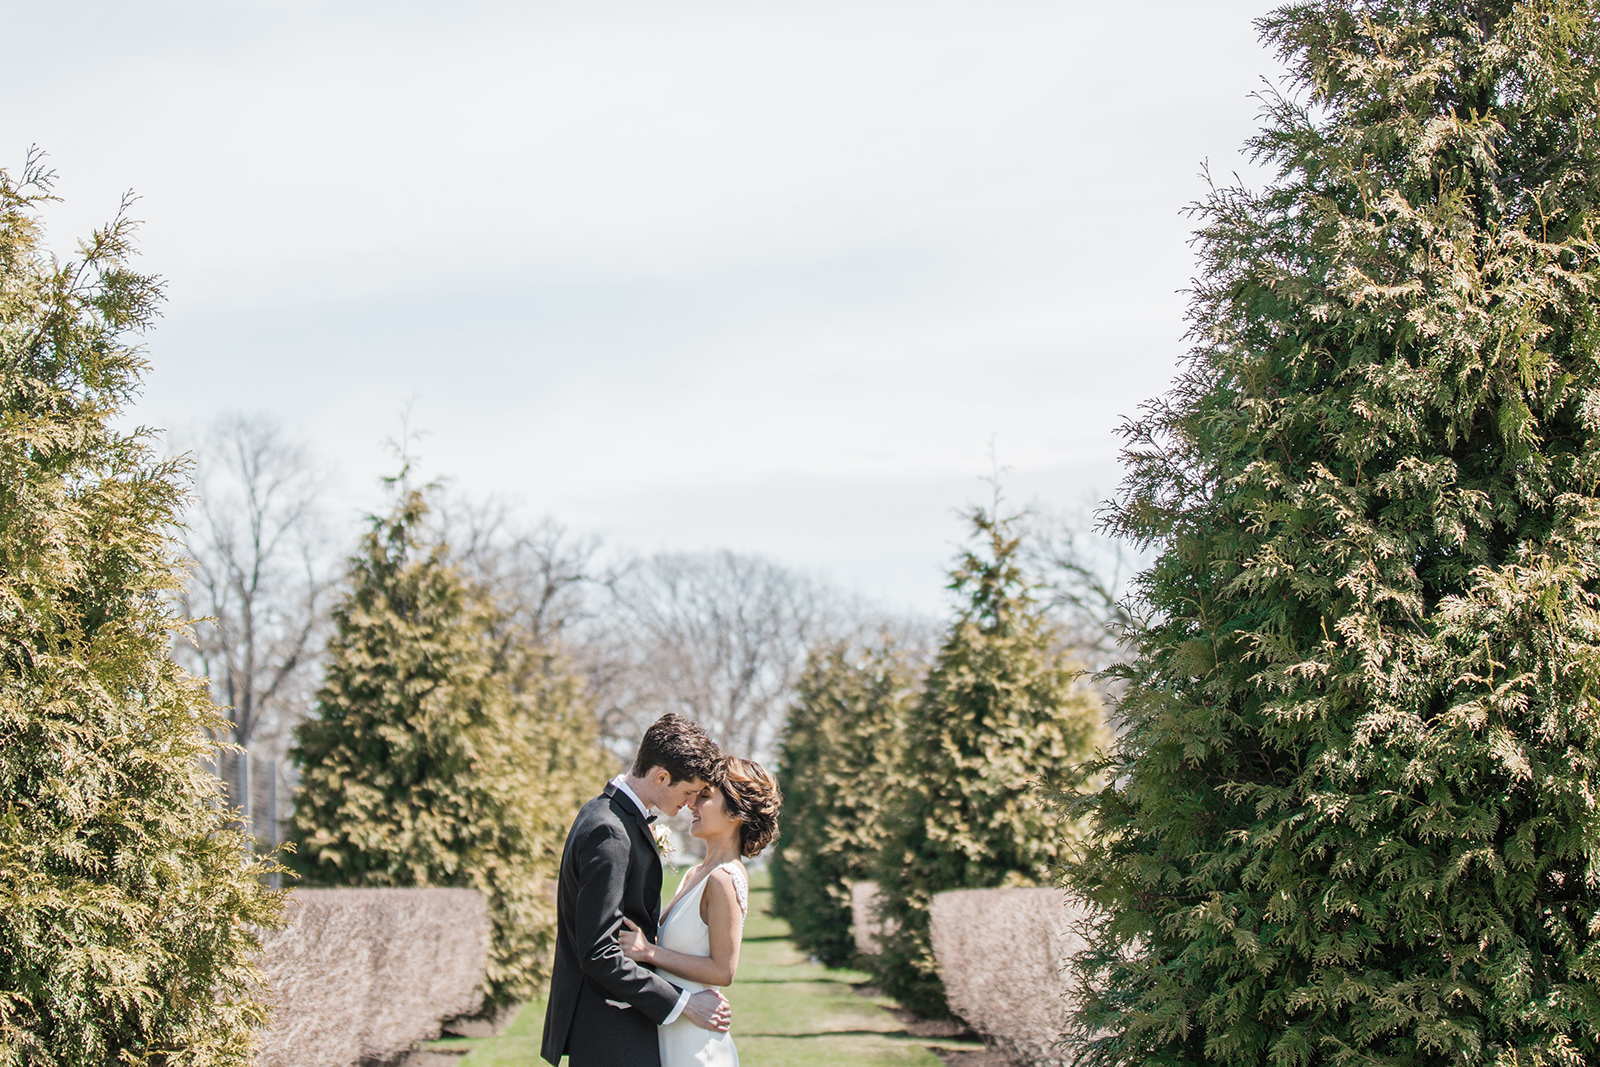  Couple shares a cute moment at Elawa Farm in Chicago for their spring wedding  